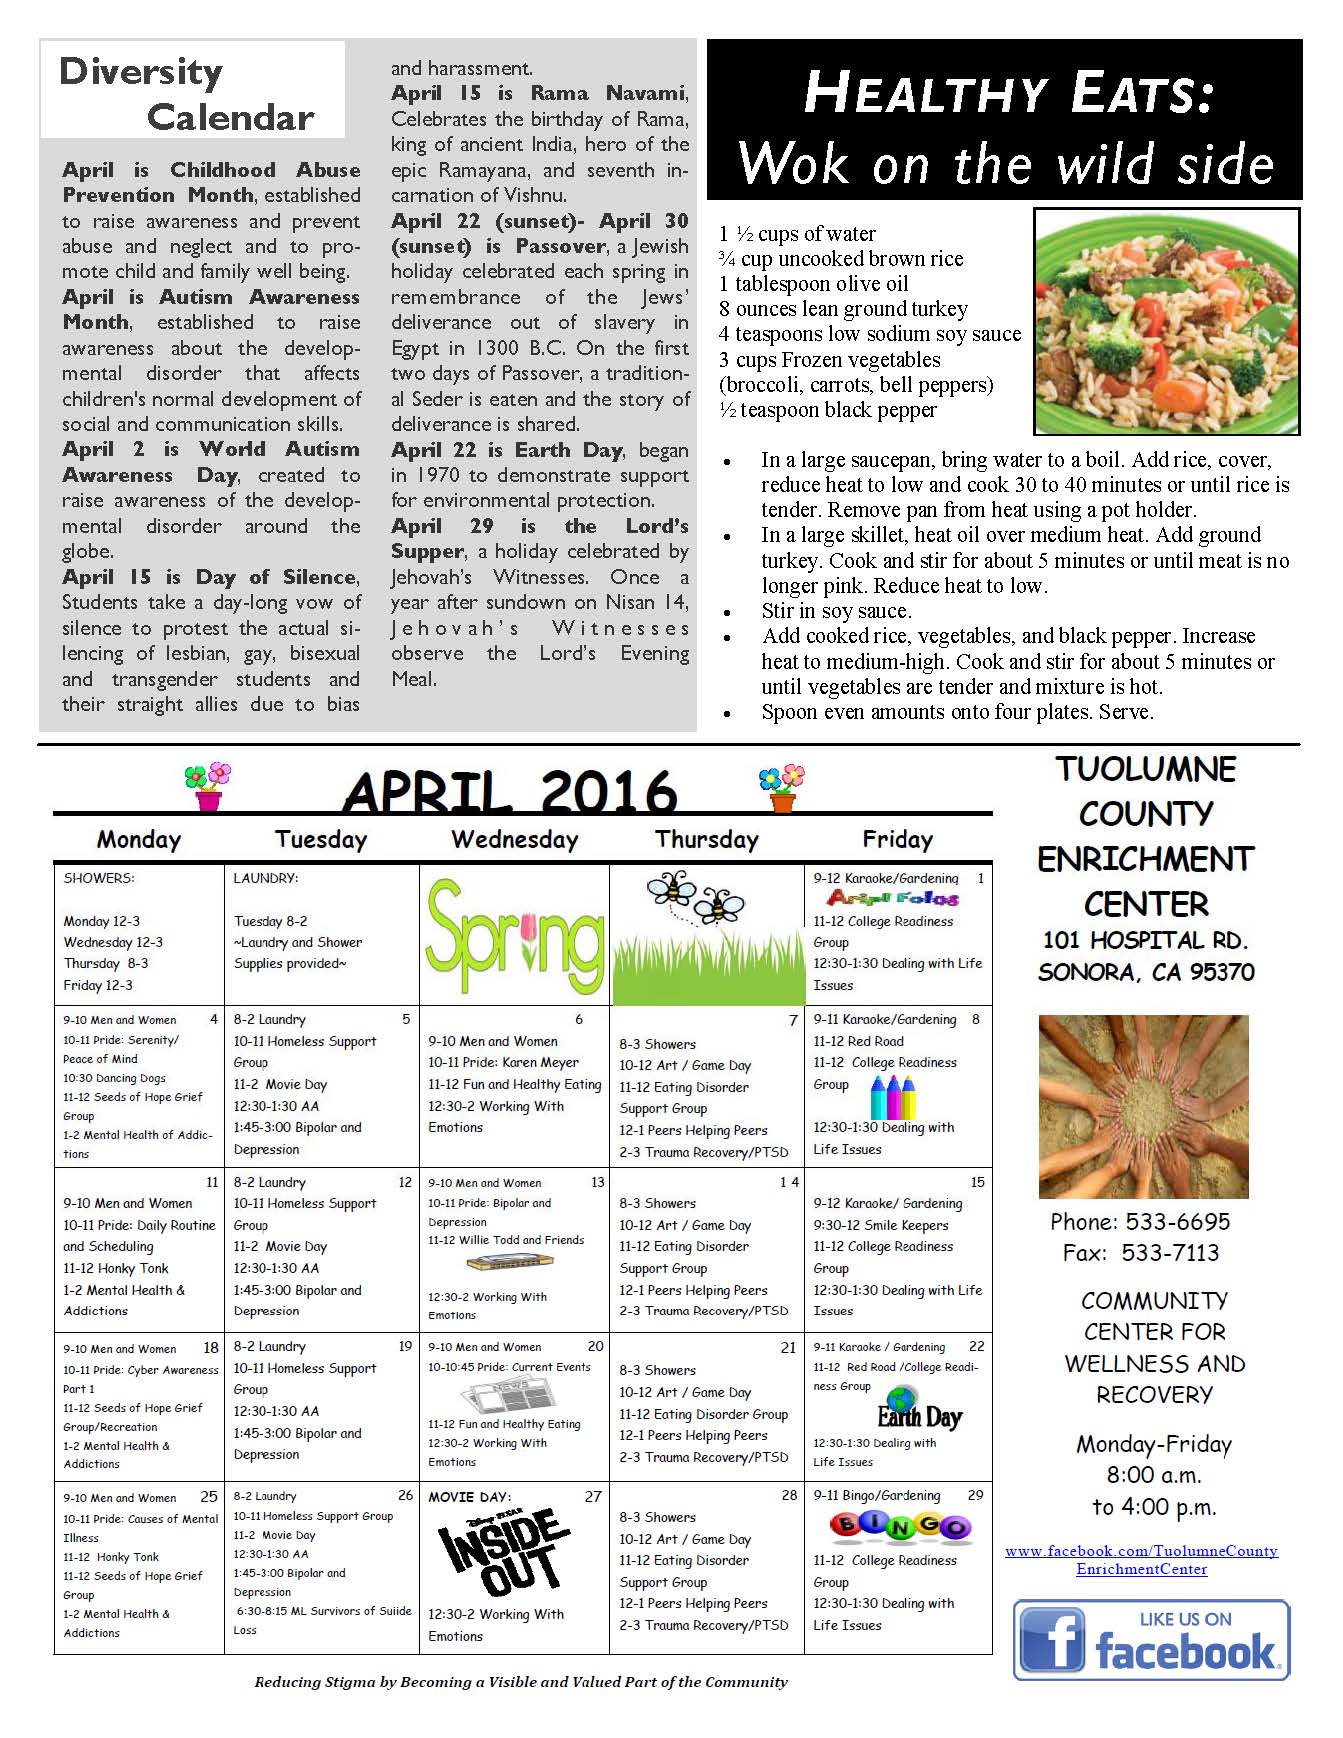 Beh Health April Newsletter Page 4